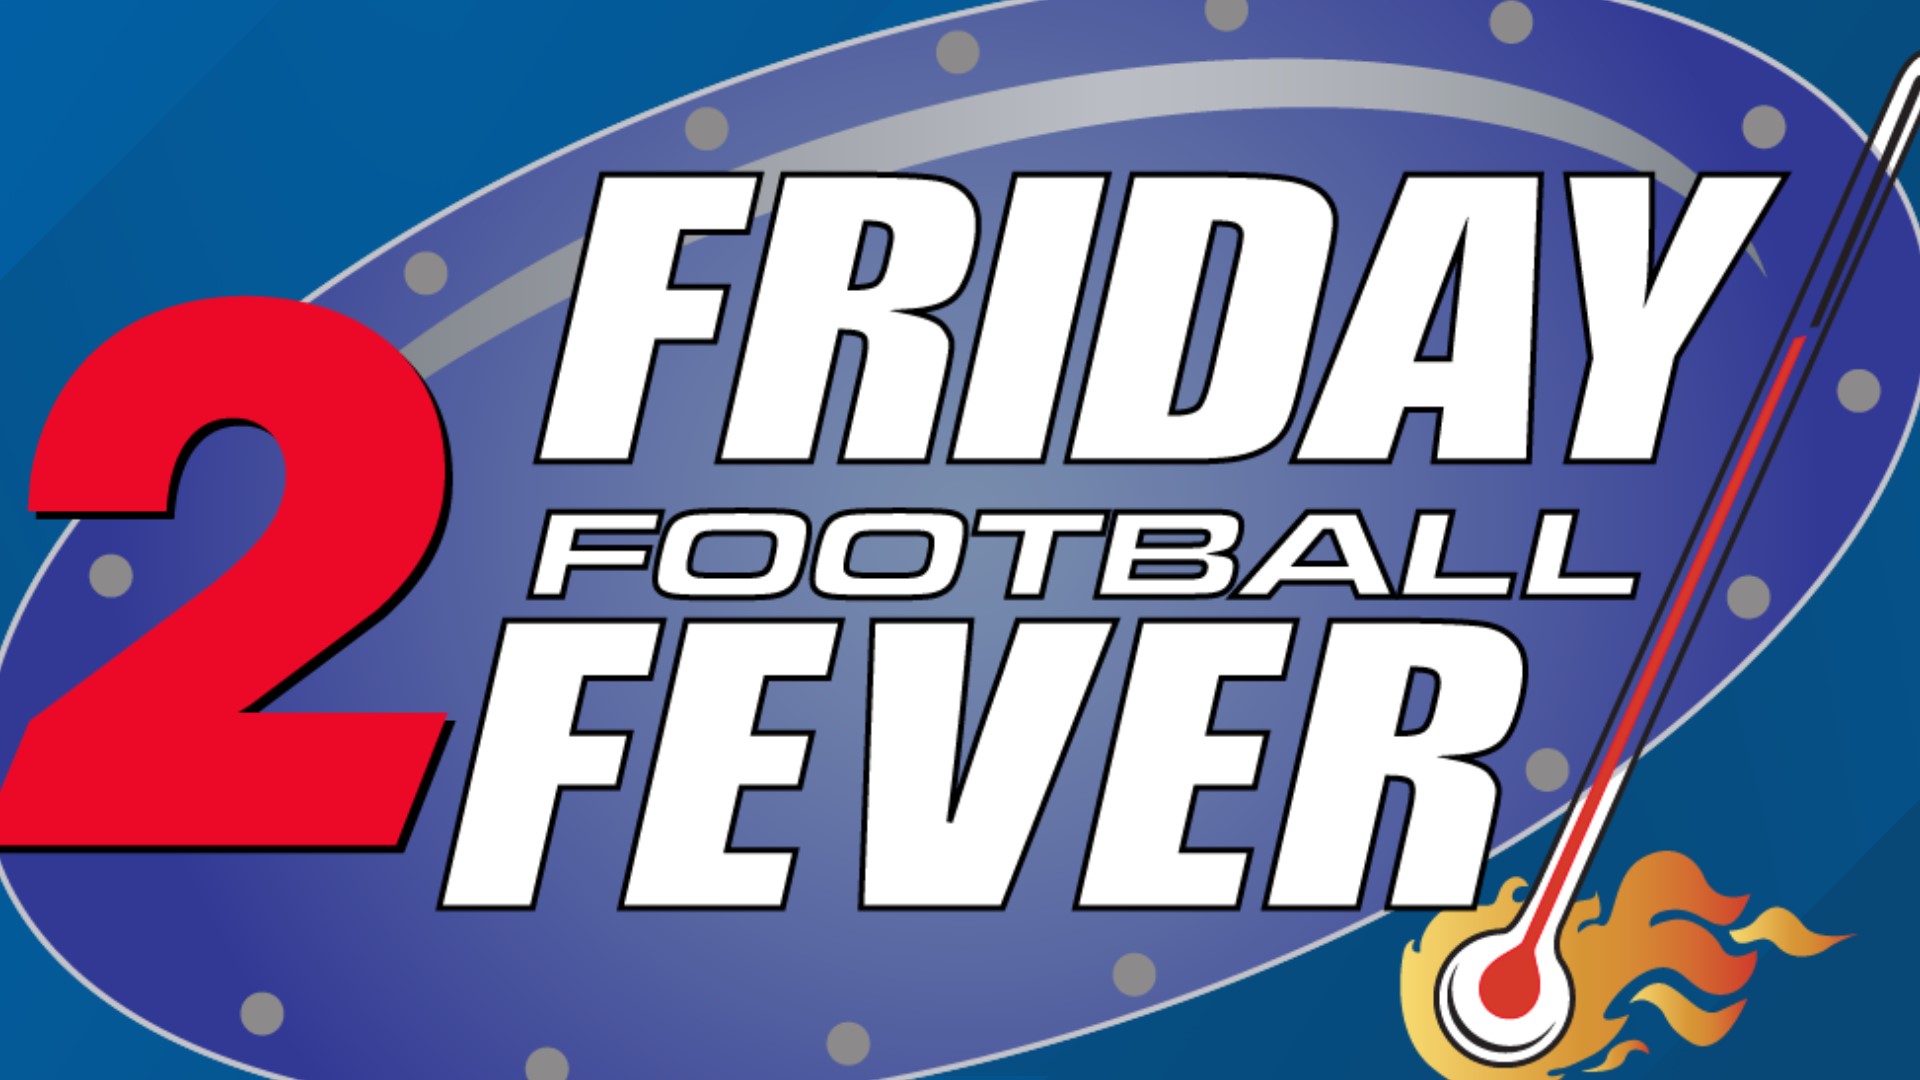 Check out all the top plays from Week 6 of Friday Football Fever!